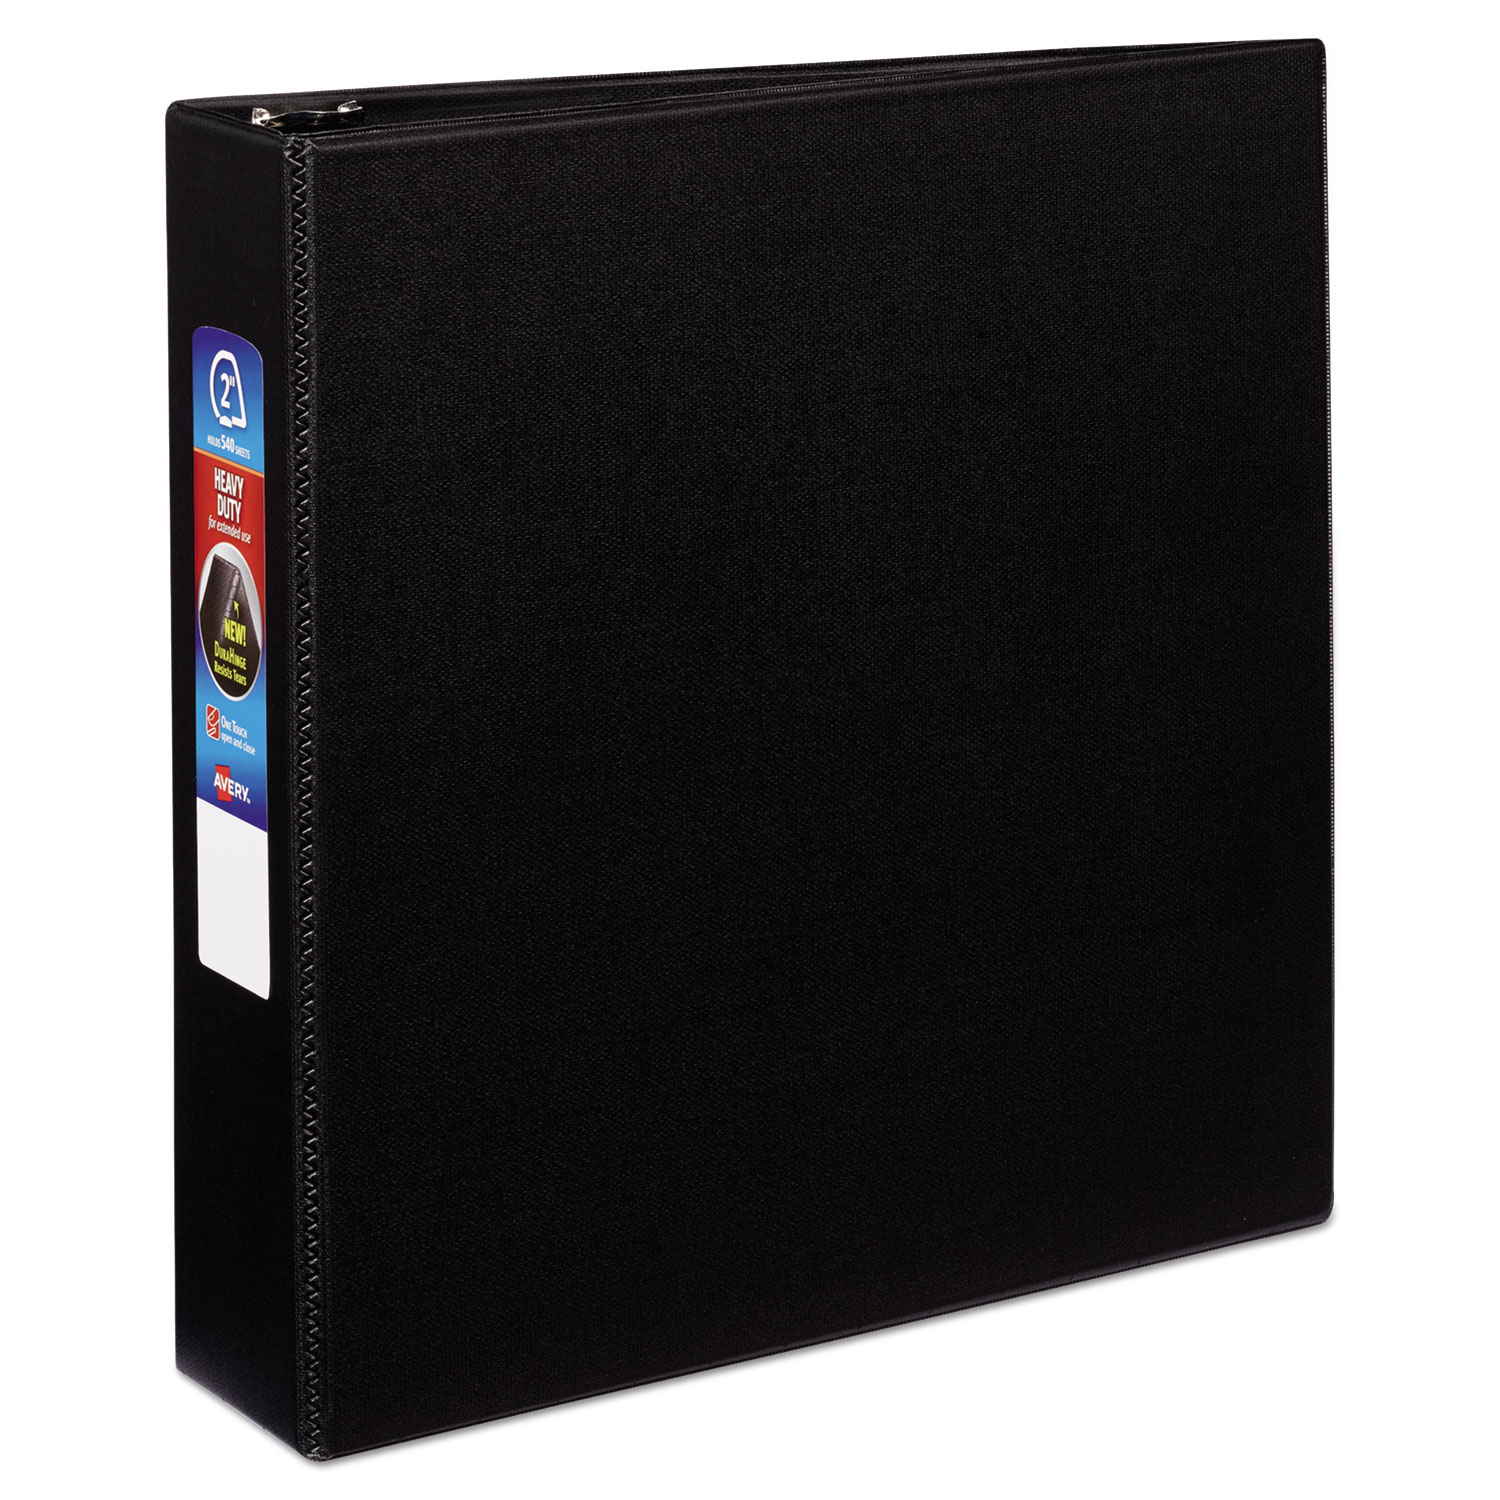  Avery 79982 Heavy-Duty Non-View Binder with DuraHinge and Locking One Touch EZD Rings, 3 Rings, 2 Capacity, 11 x 8.5, Black (AVE79982) 